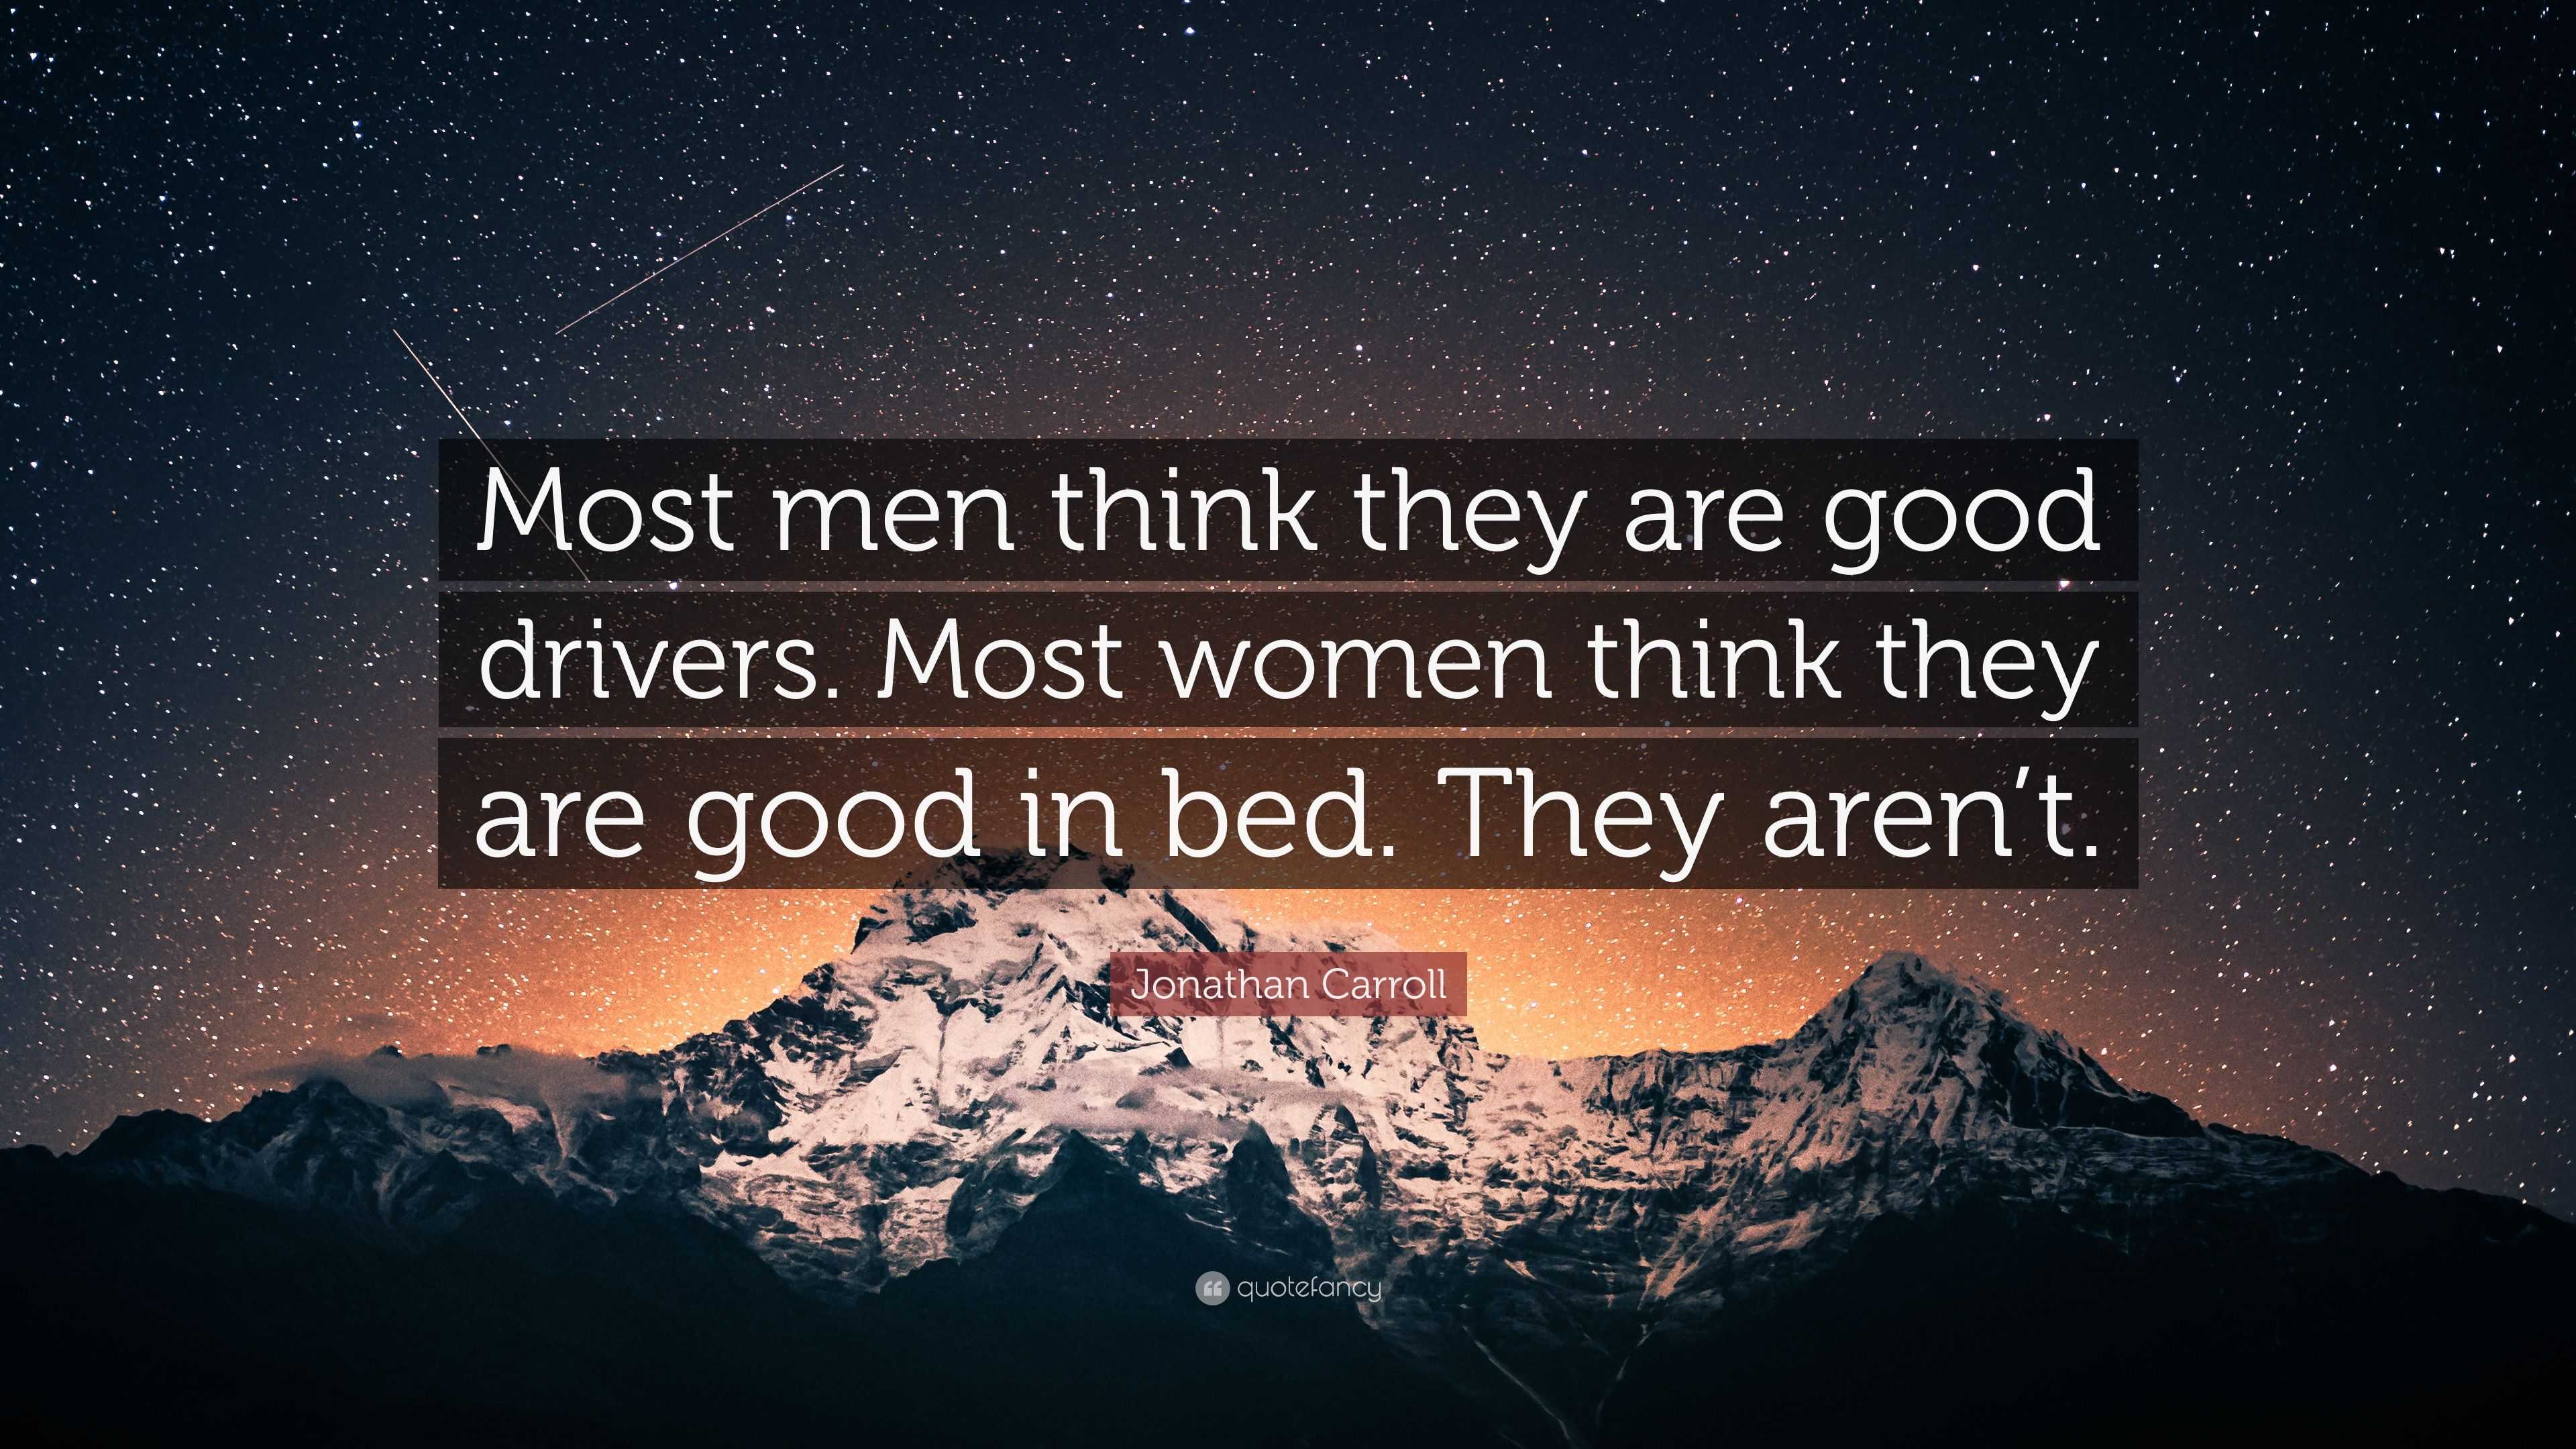 What do men think about most